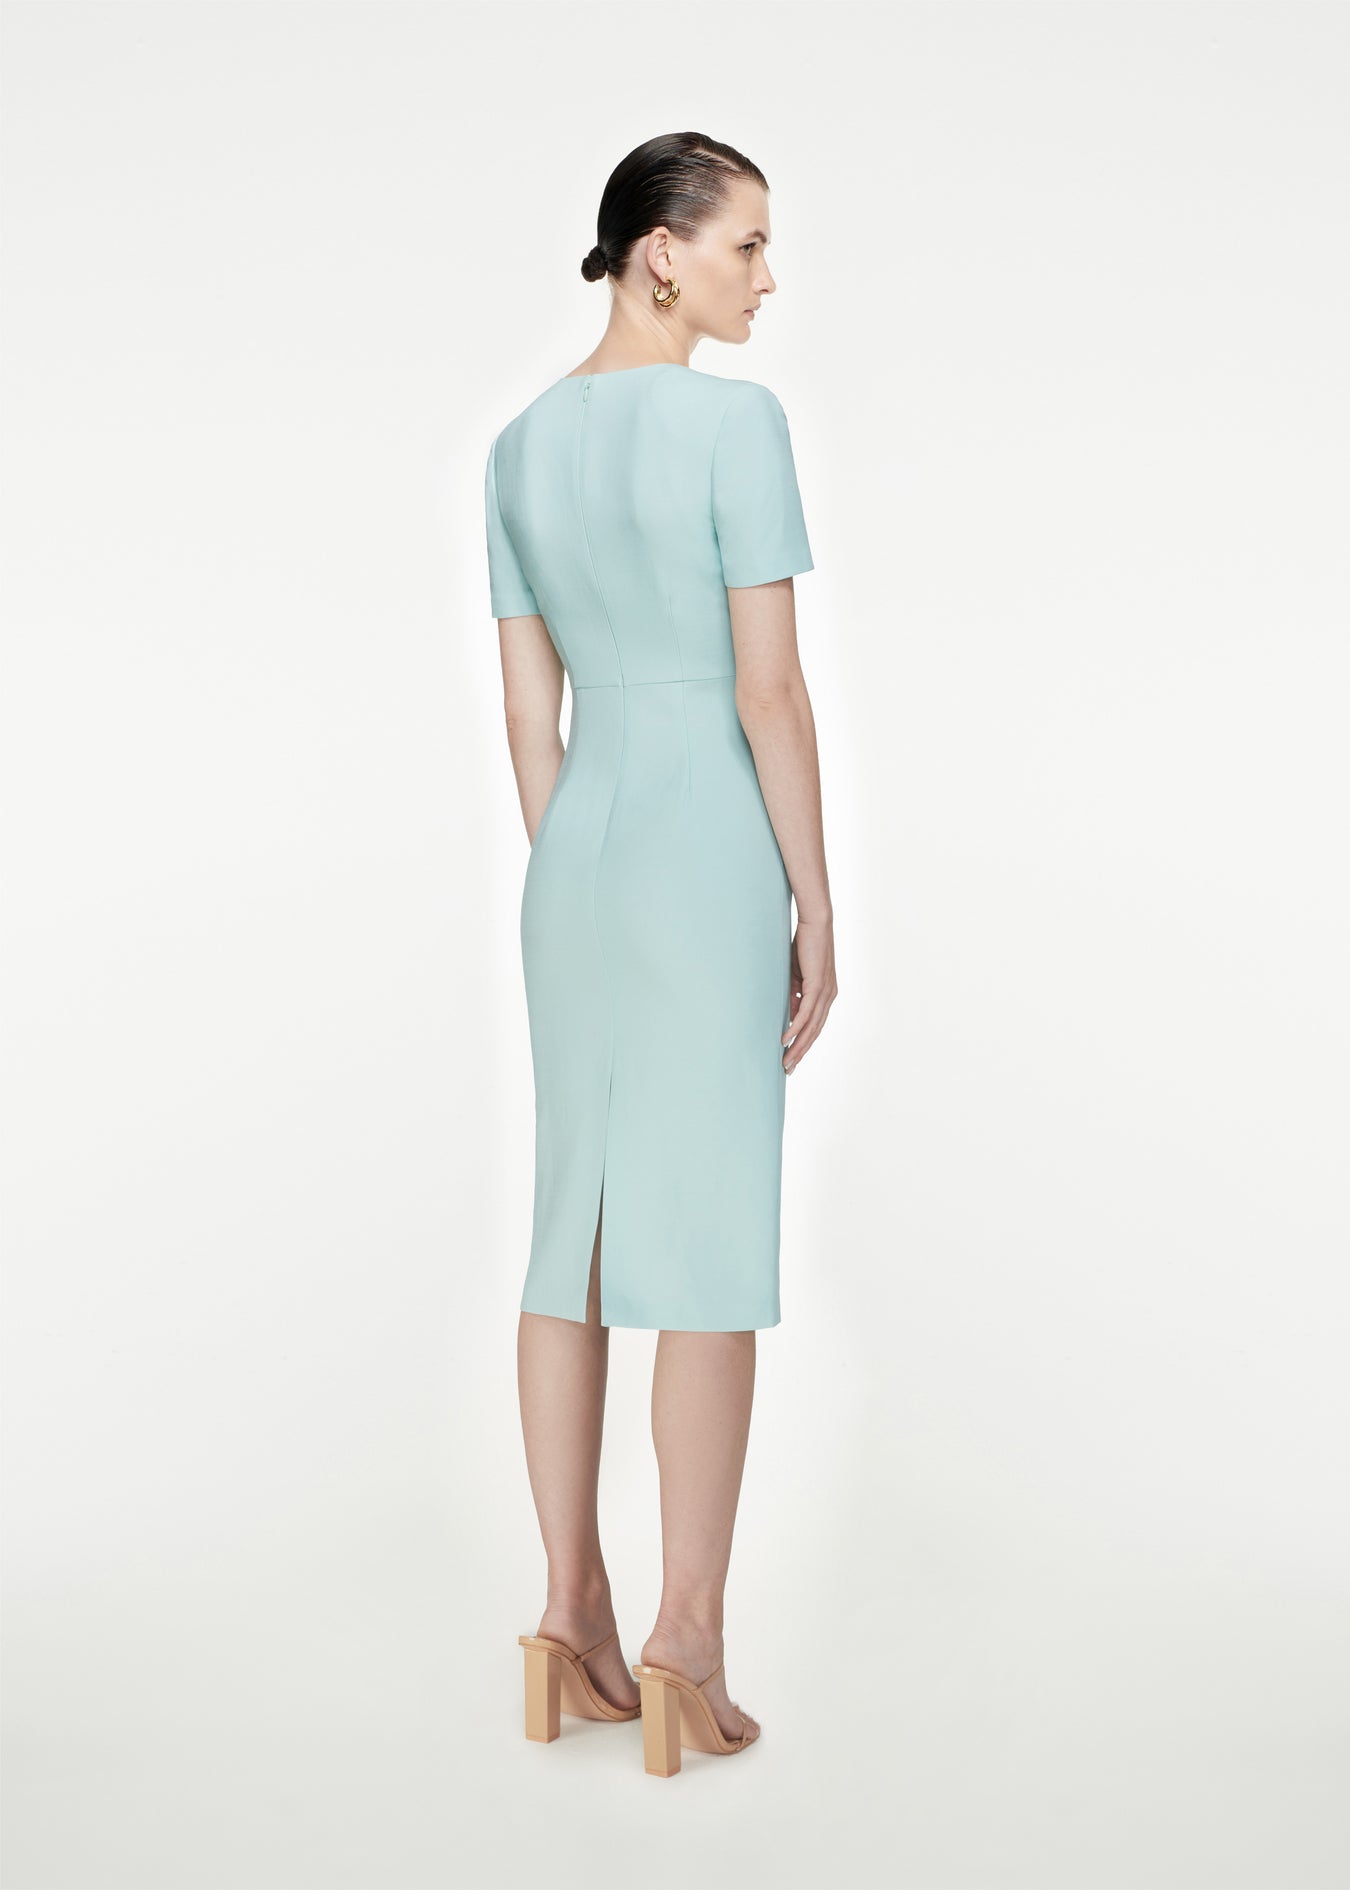 The back of a woman wearing the Short Sleeve Silk Wool Midi Dress in Light Blue